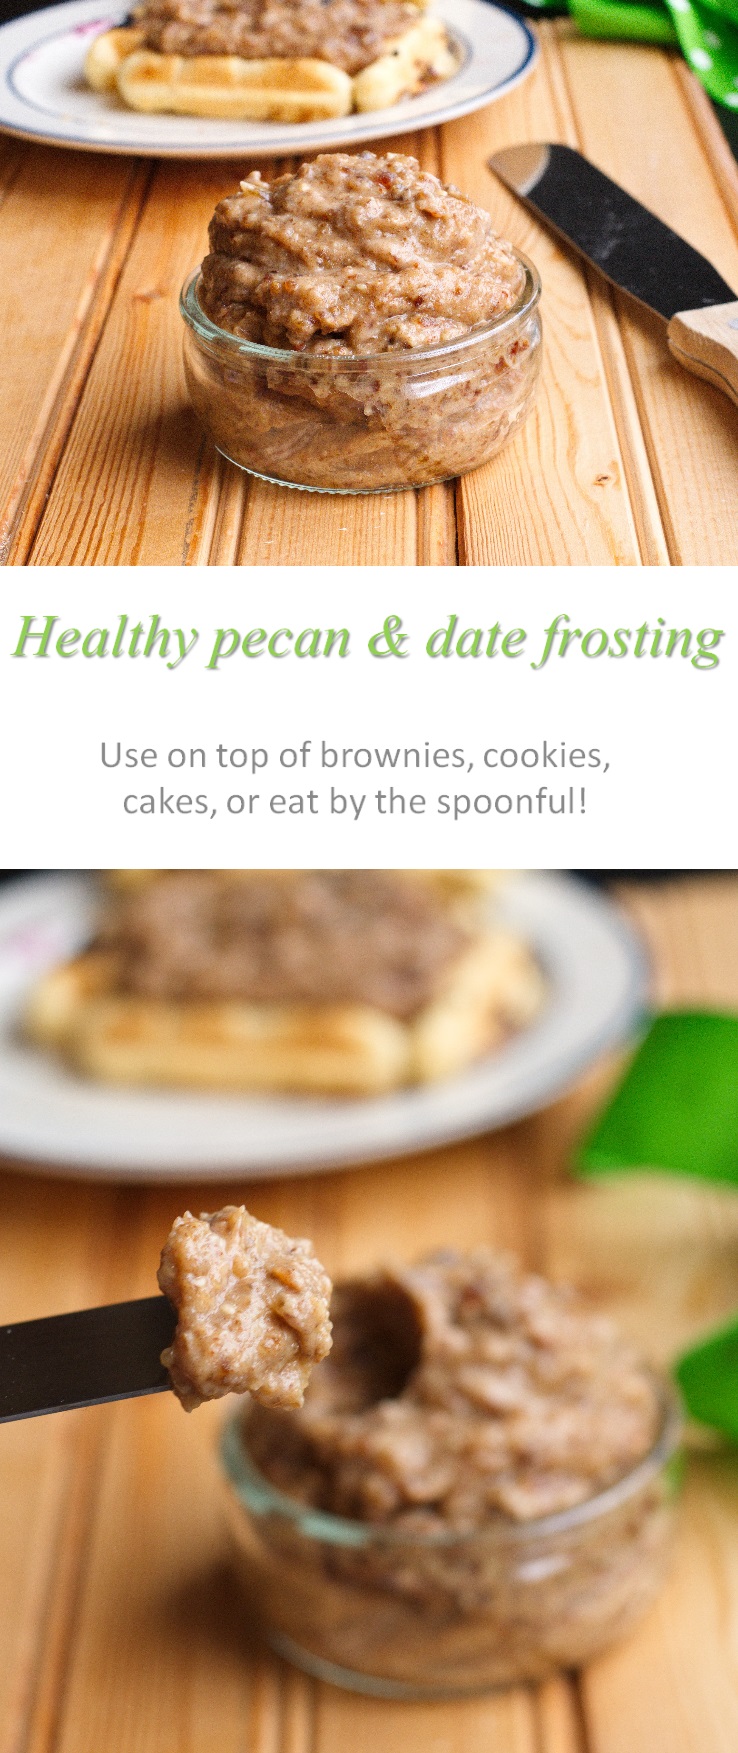 This healthy frosting is an alternative to all the high sugar frosting out there ... using all natural fruit and nuts with a texture that surprises you! #frosting